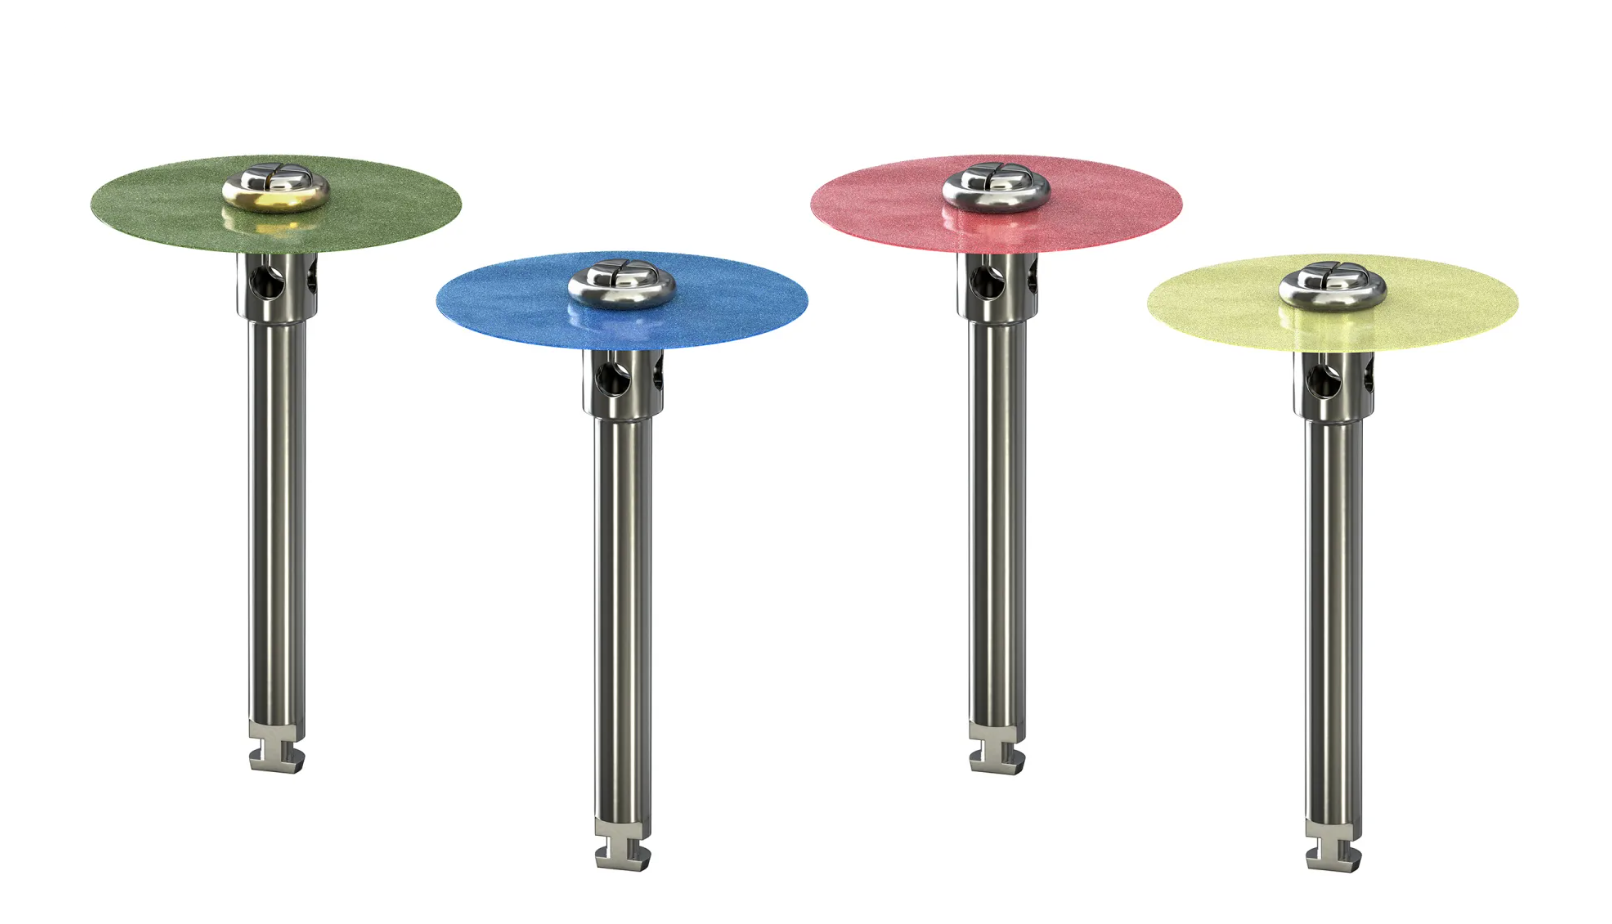 Jiffy™ Spin Disks from Ultradent